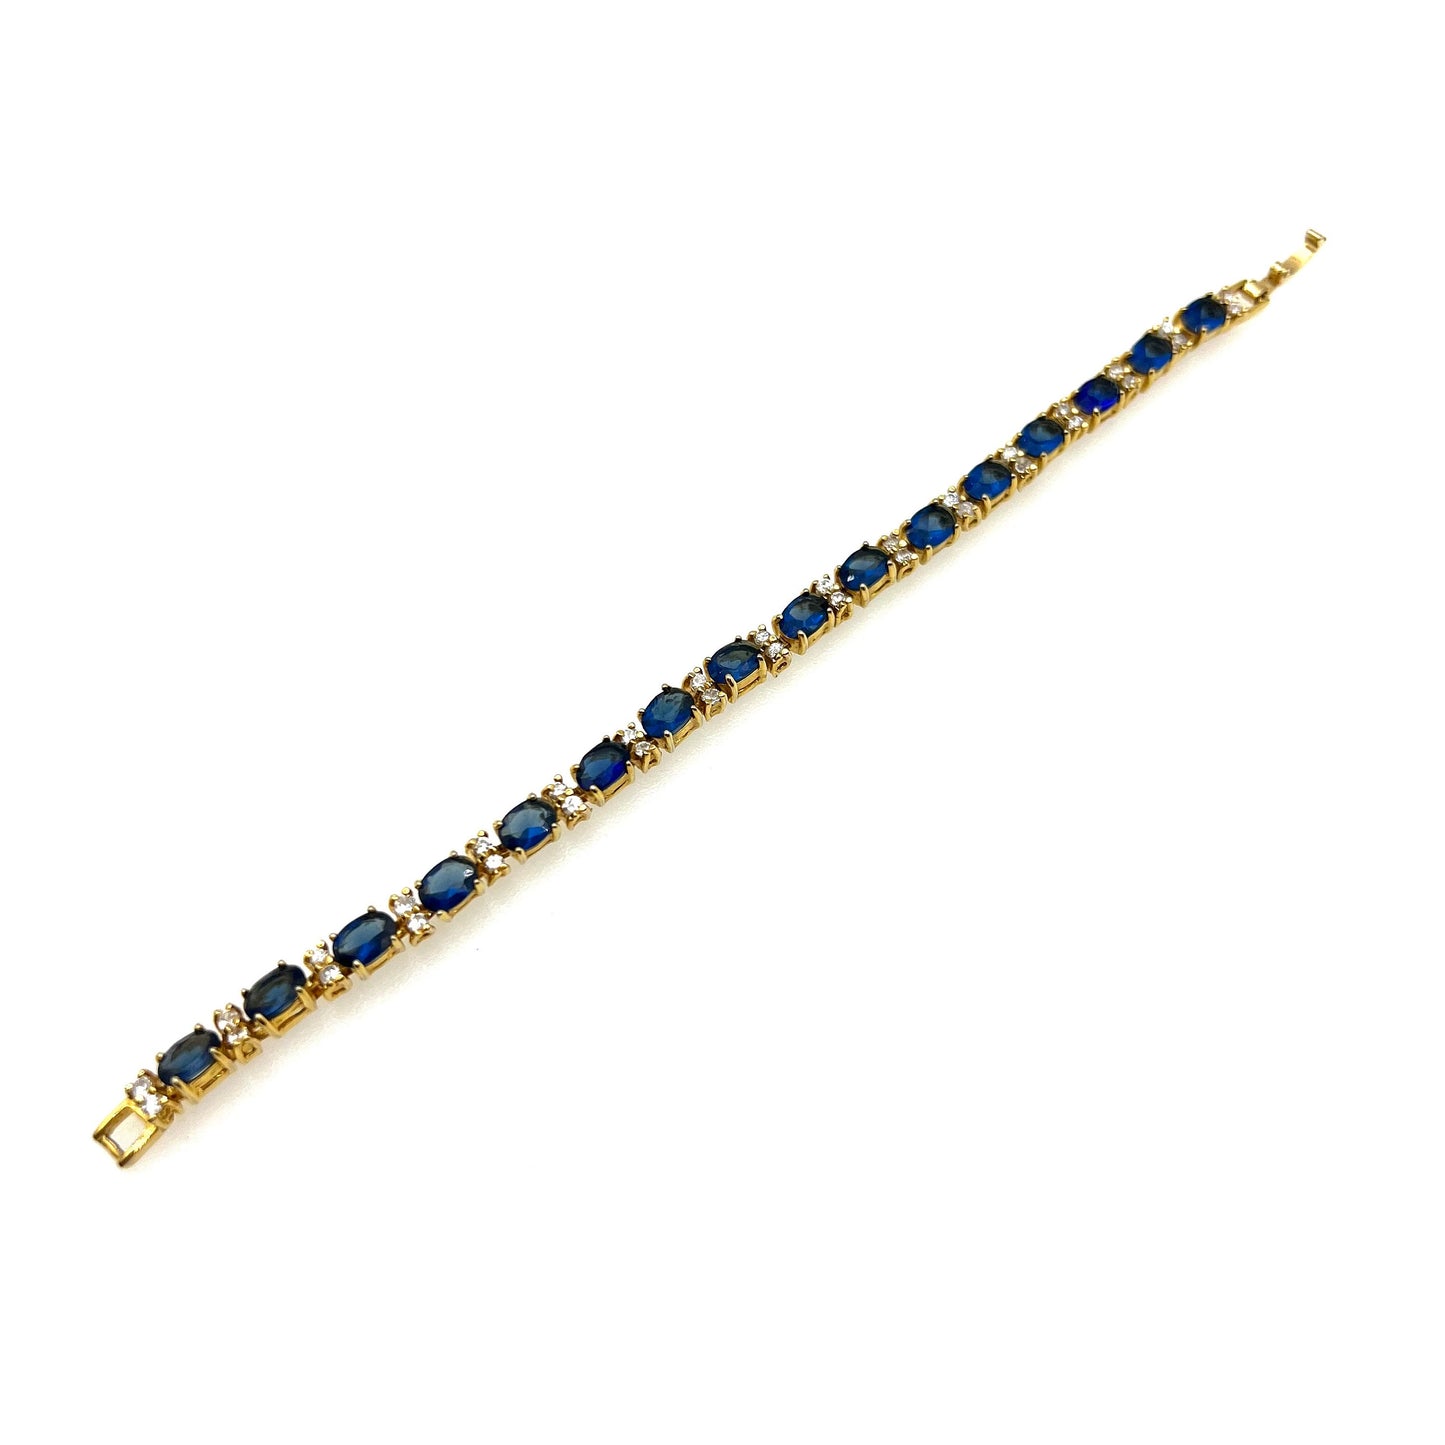 Unsigned Royal Blue and Clear Crystal 18ct Gold Plated Chain Link Bracelet